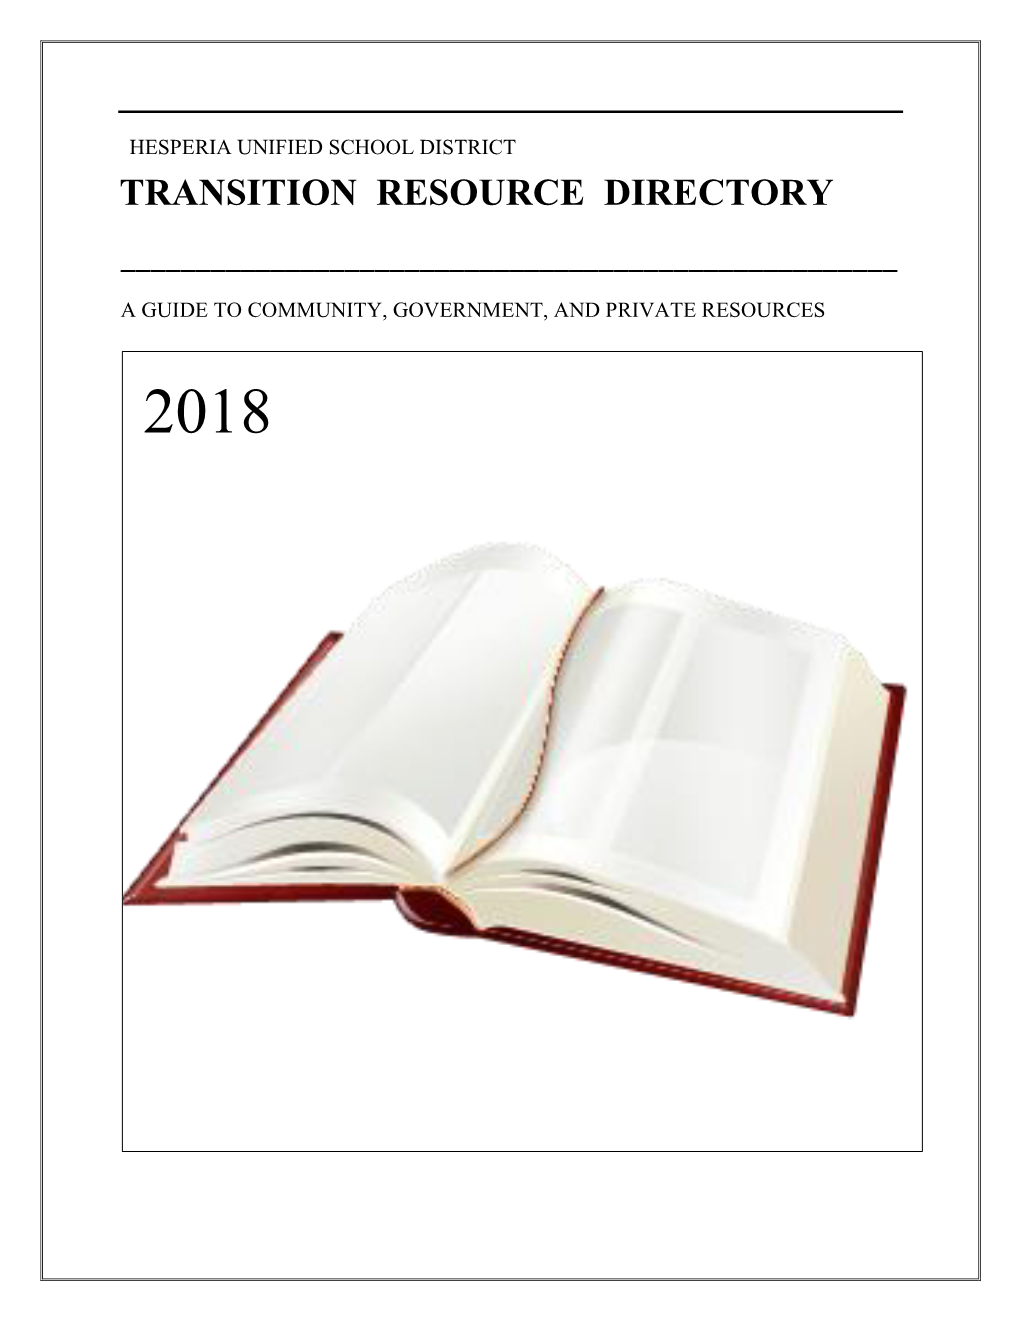 Transition Resource Directory